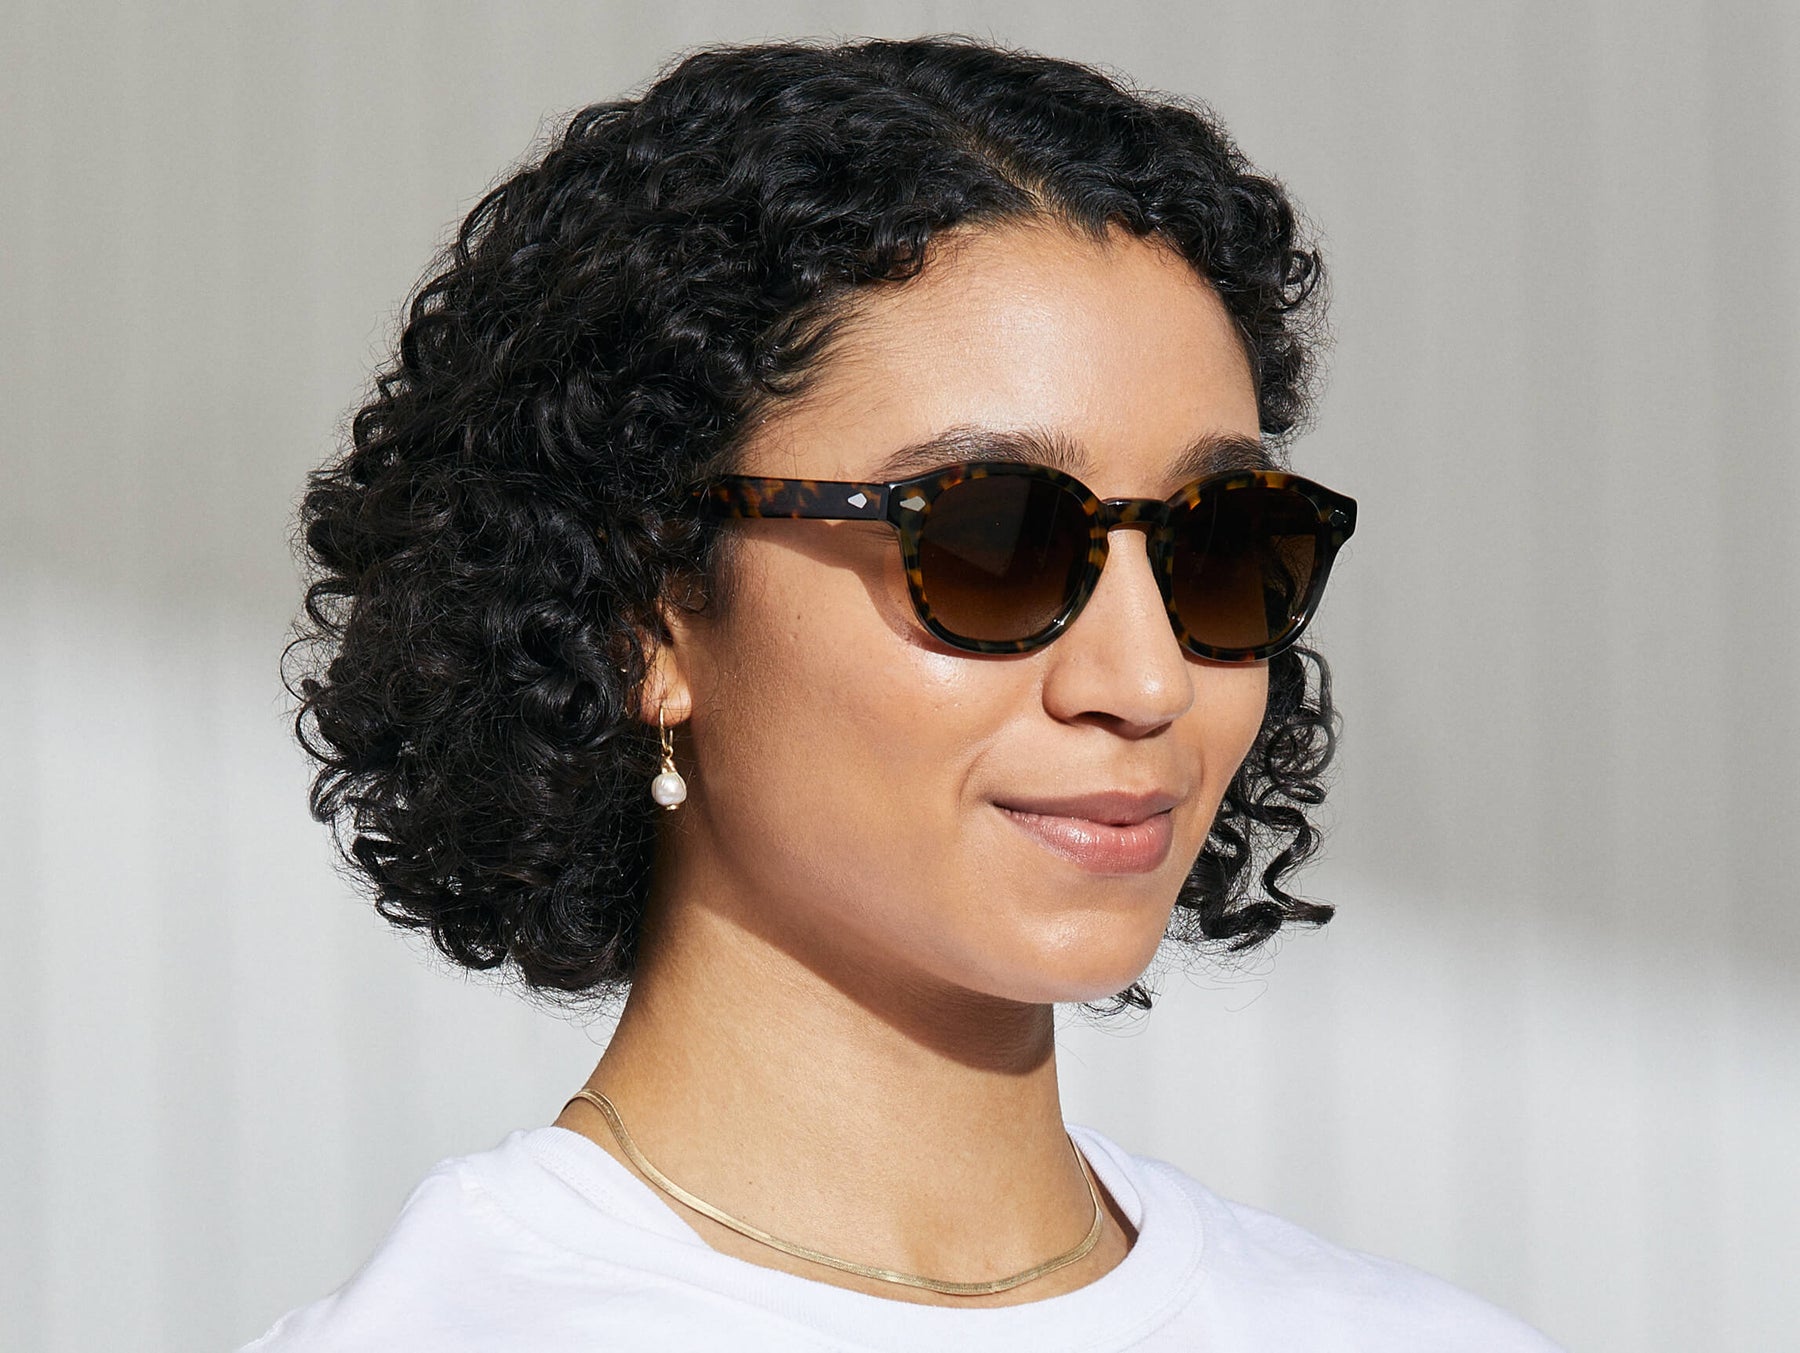 Model is wearing The LEMTOSH SPORT in Tortoise in size 49 with Amber Polarized Nylon Lenses